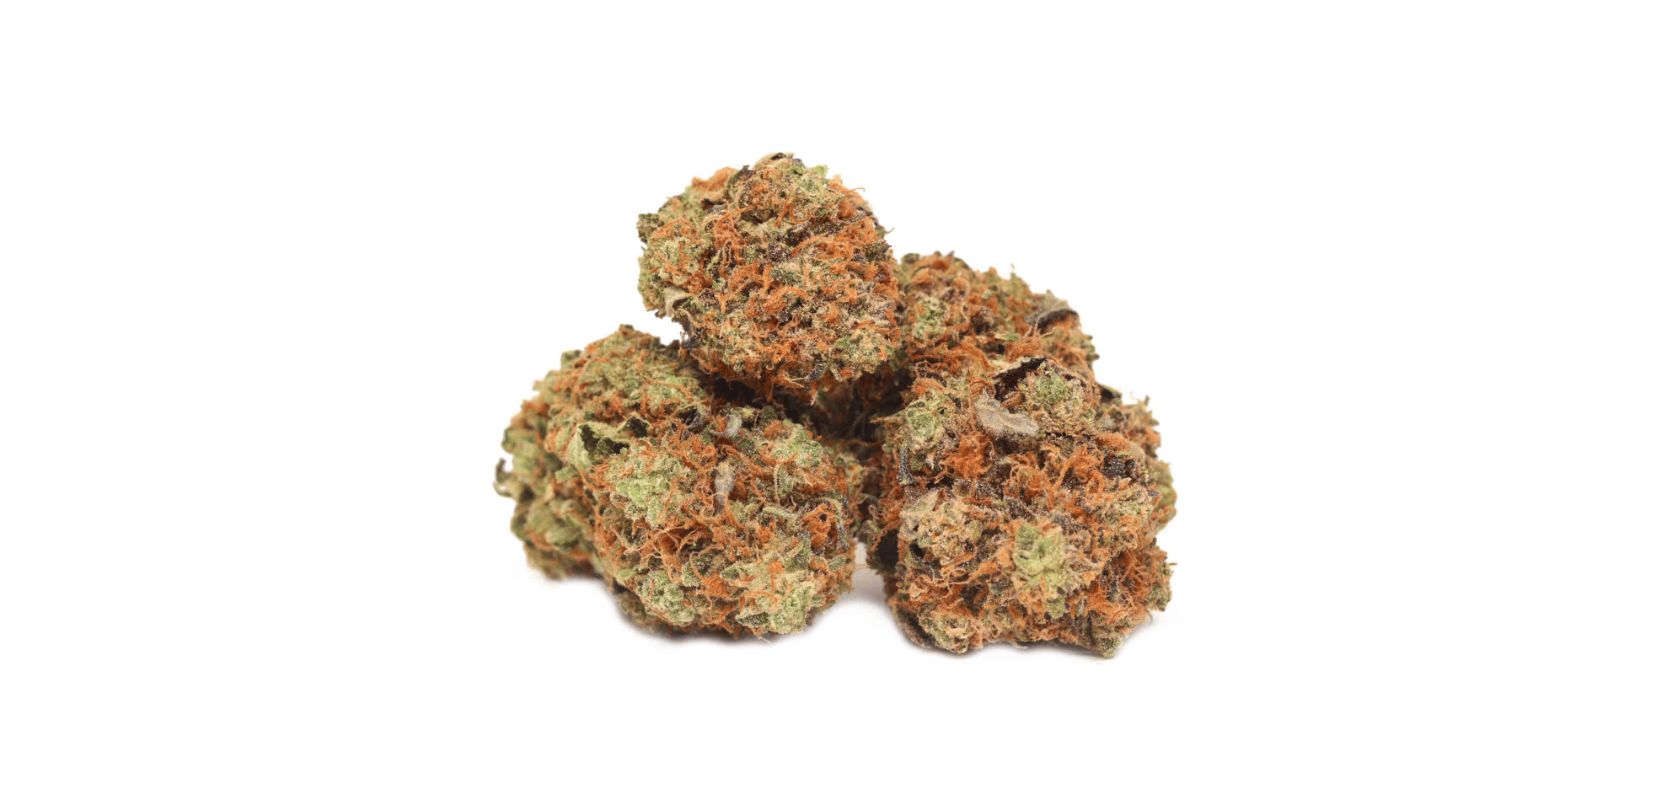 Well, the Death Bubba strain is a lemony fruity bud, so it will appeal to stoners in love with refreshing flavours. 